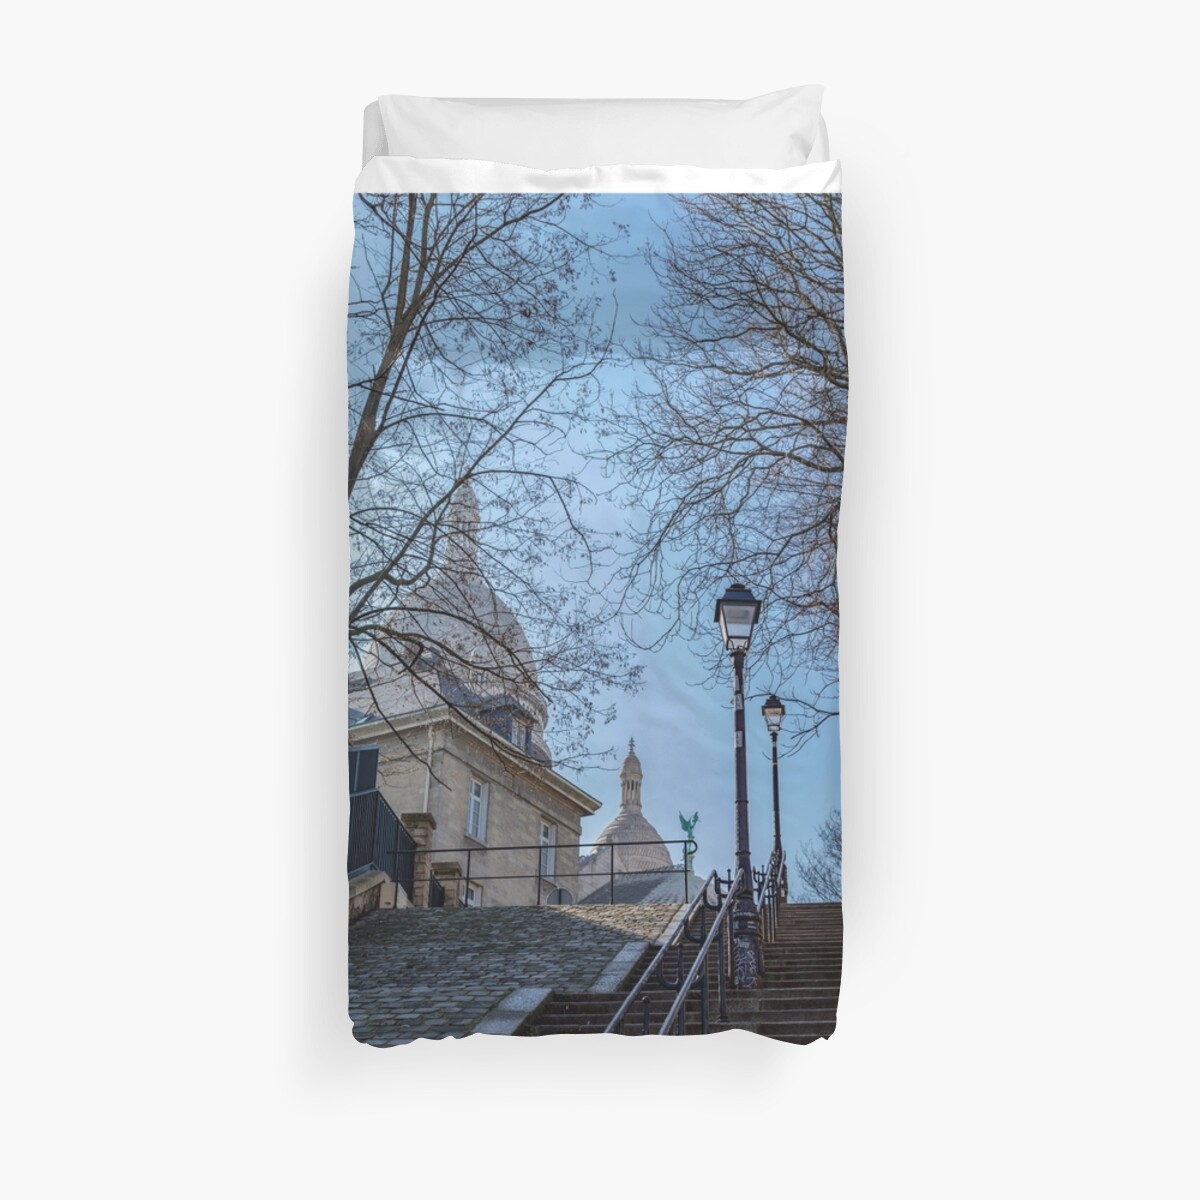 Montmartre Staircase In Paris France Duvet Cover By Ulysse Pixel